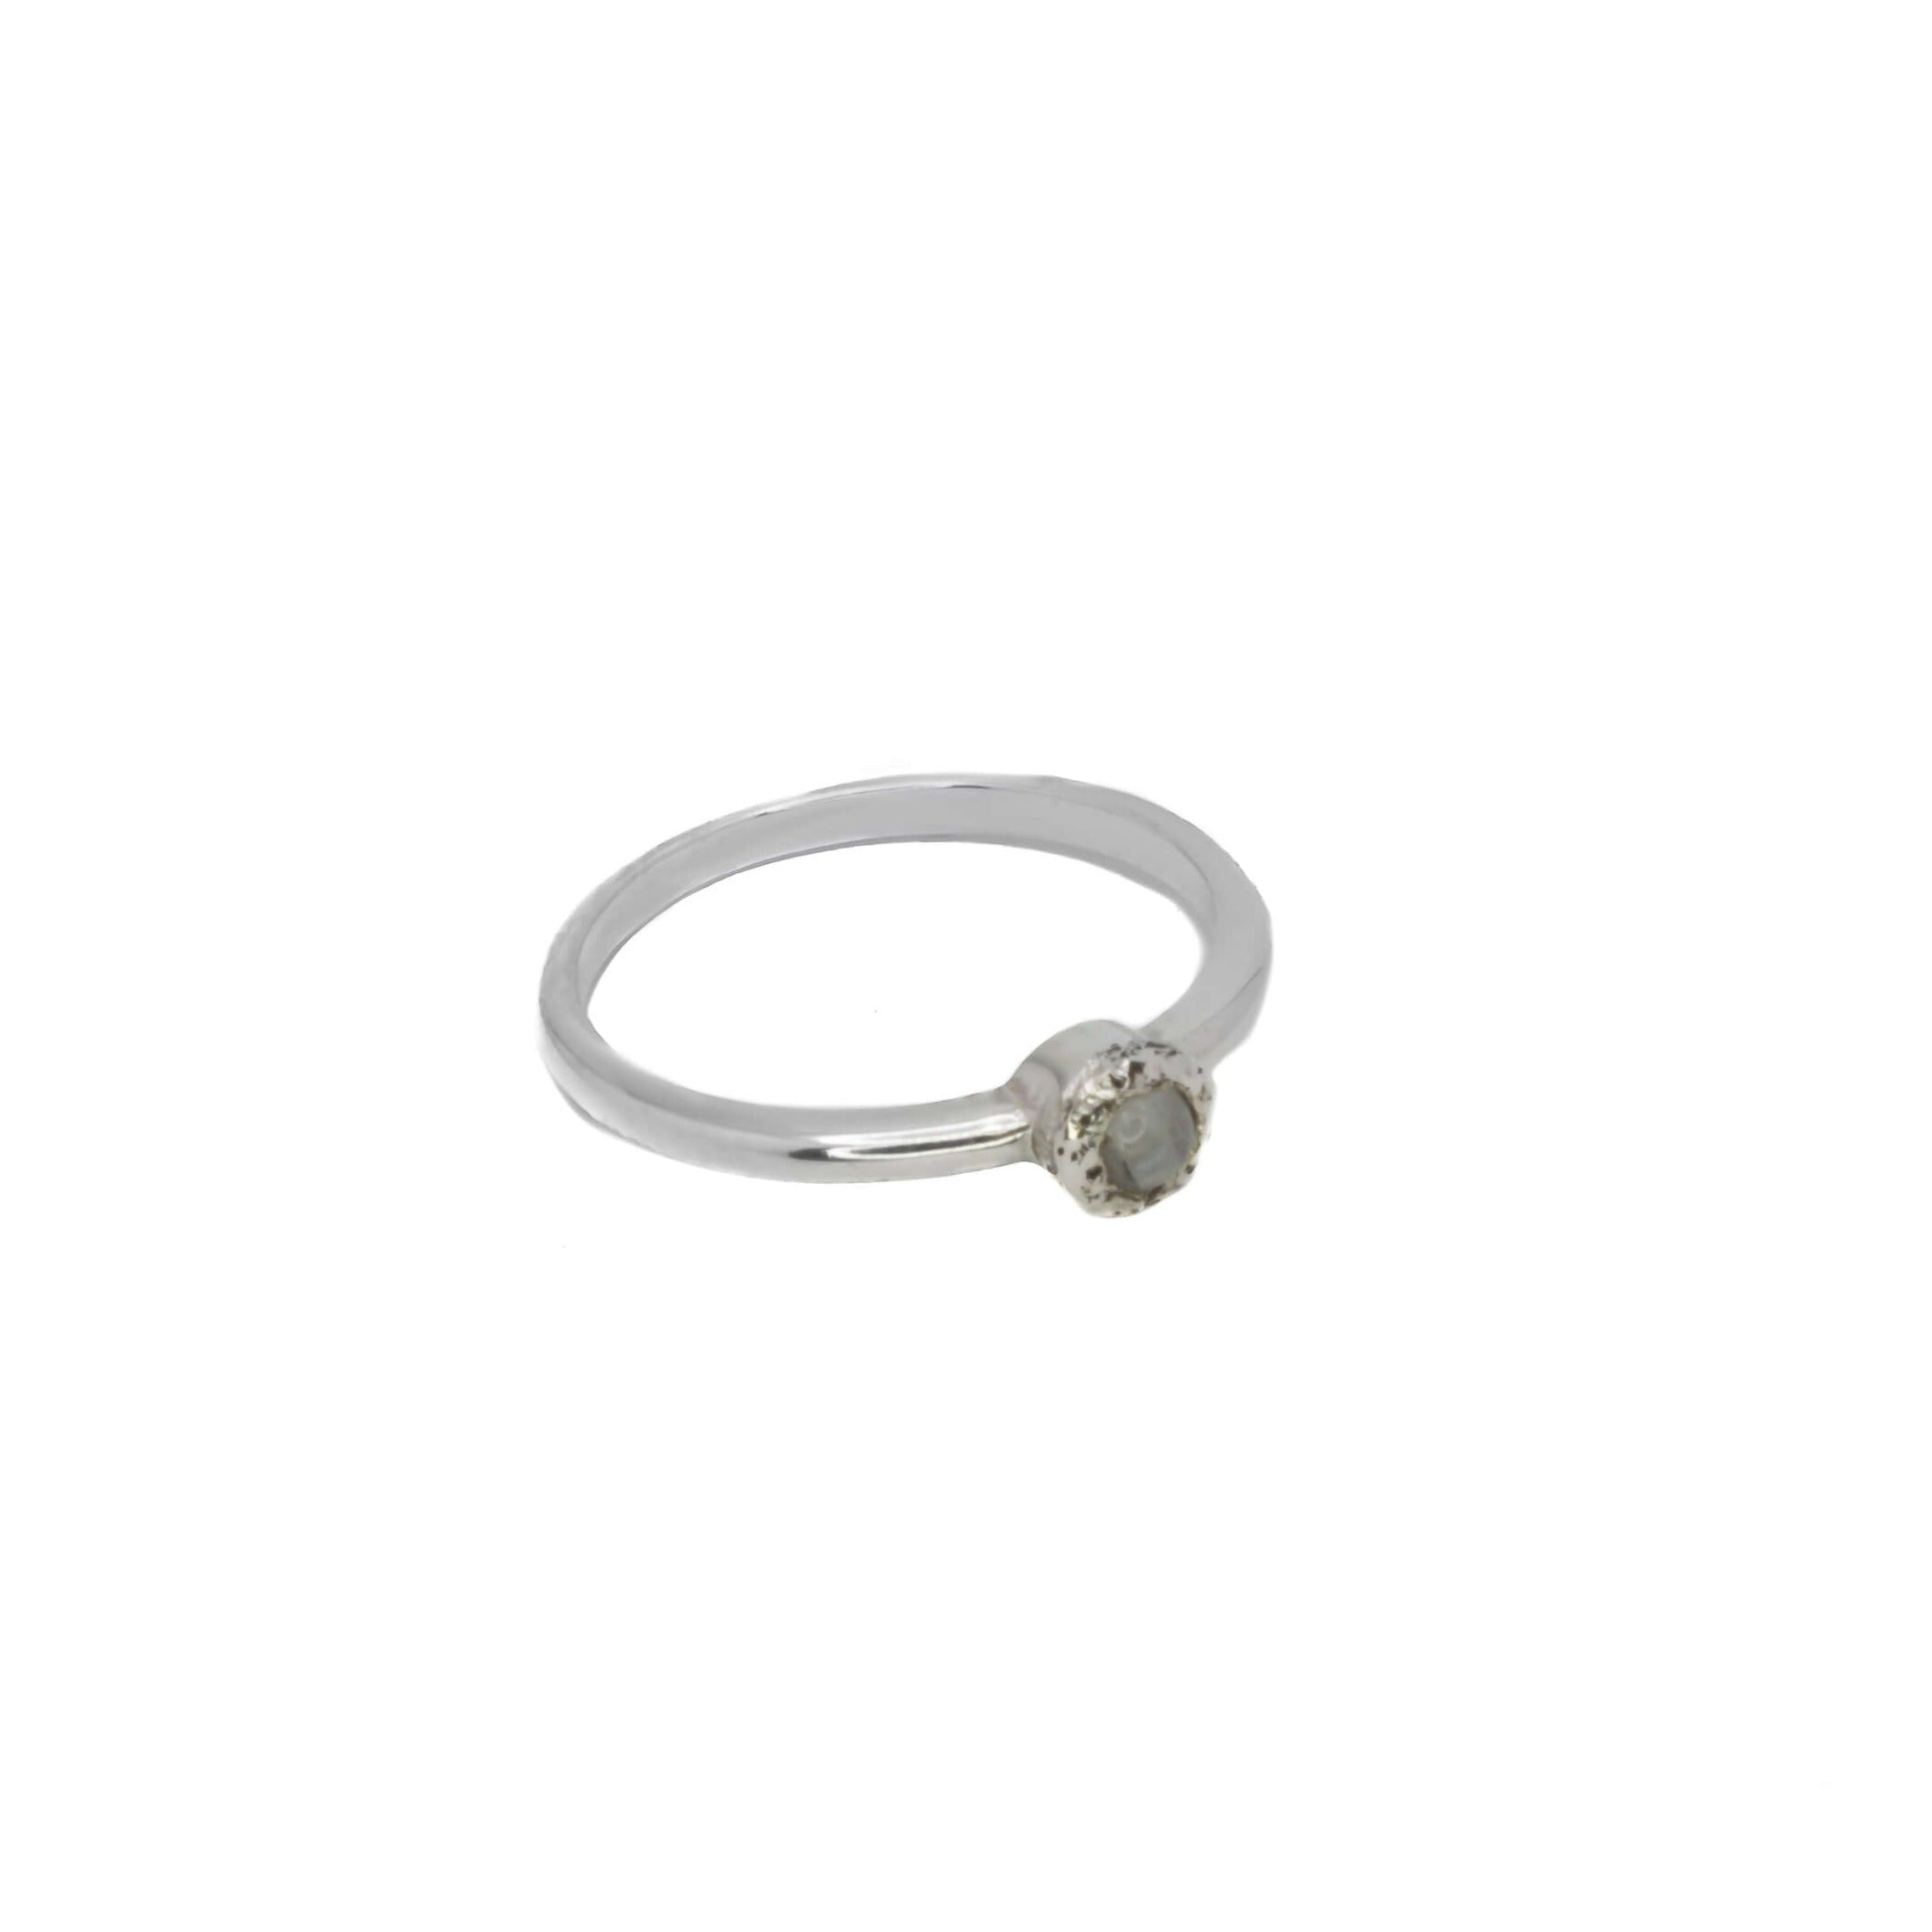 Moonstone stackable ring sterling silver